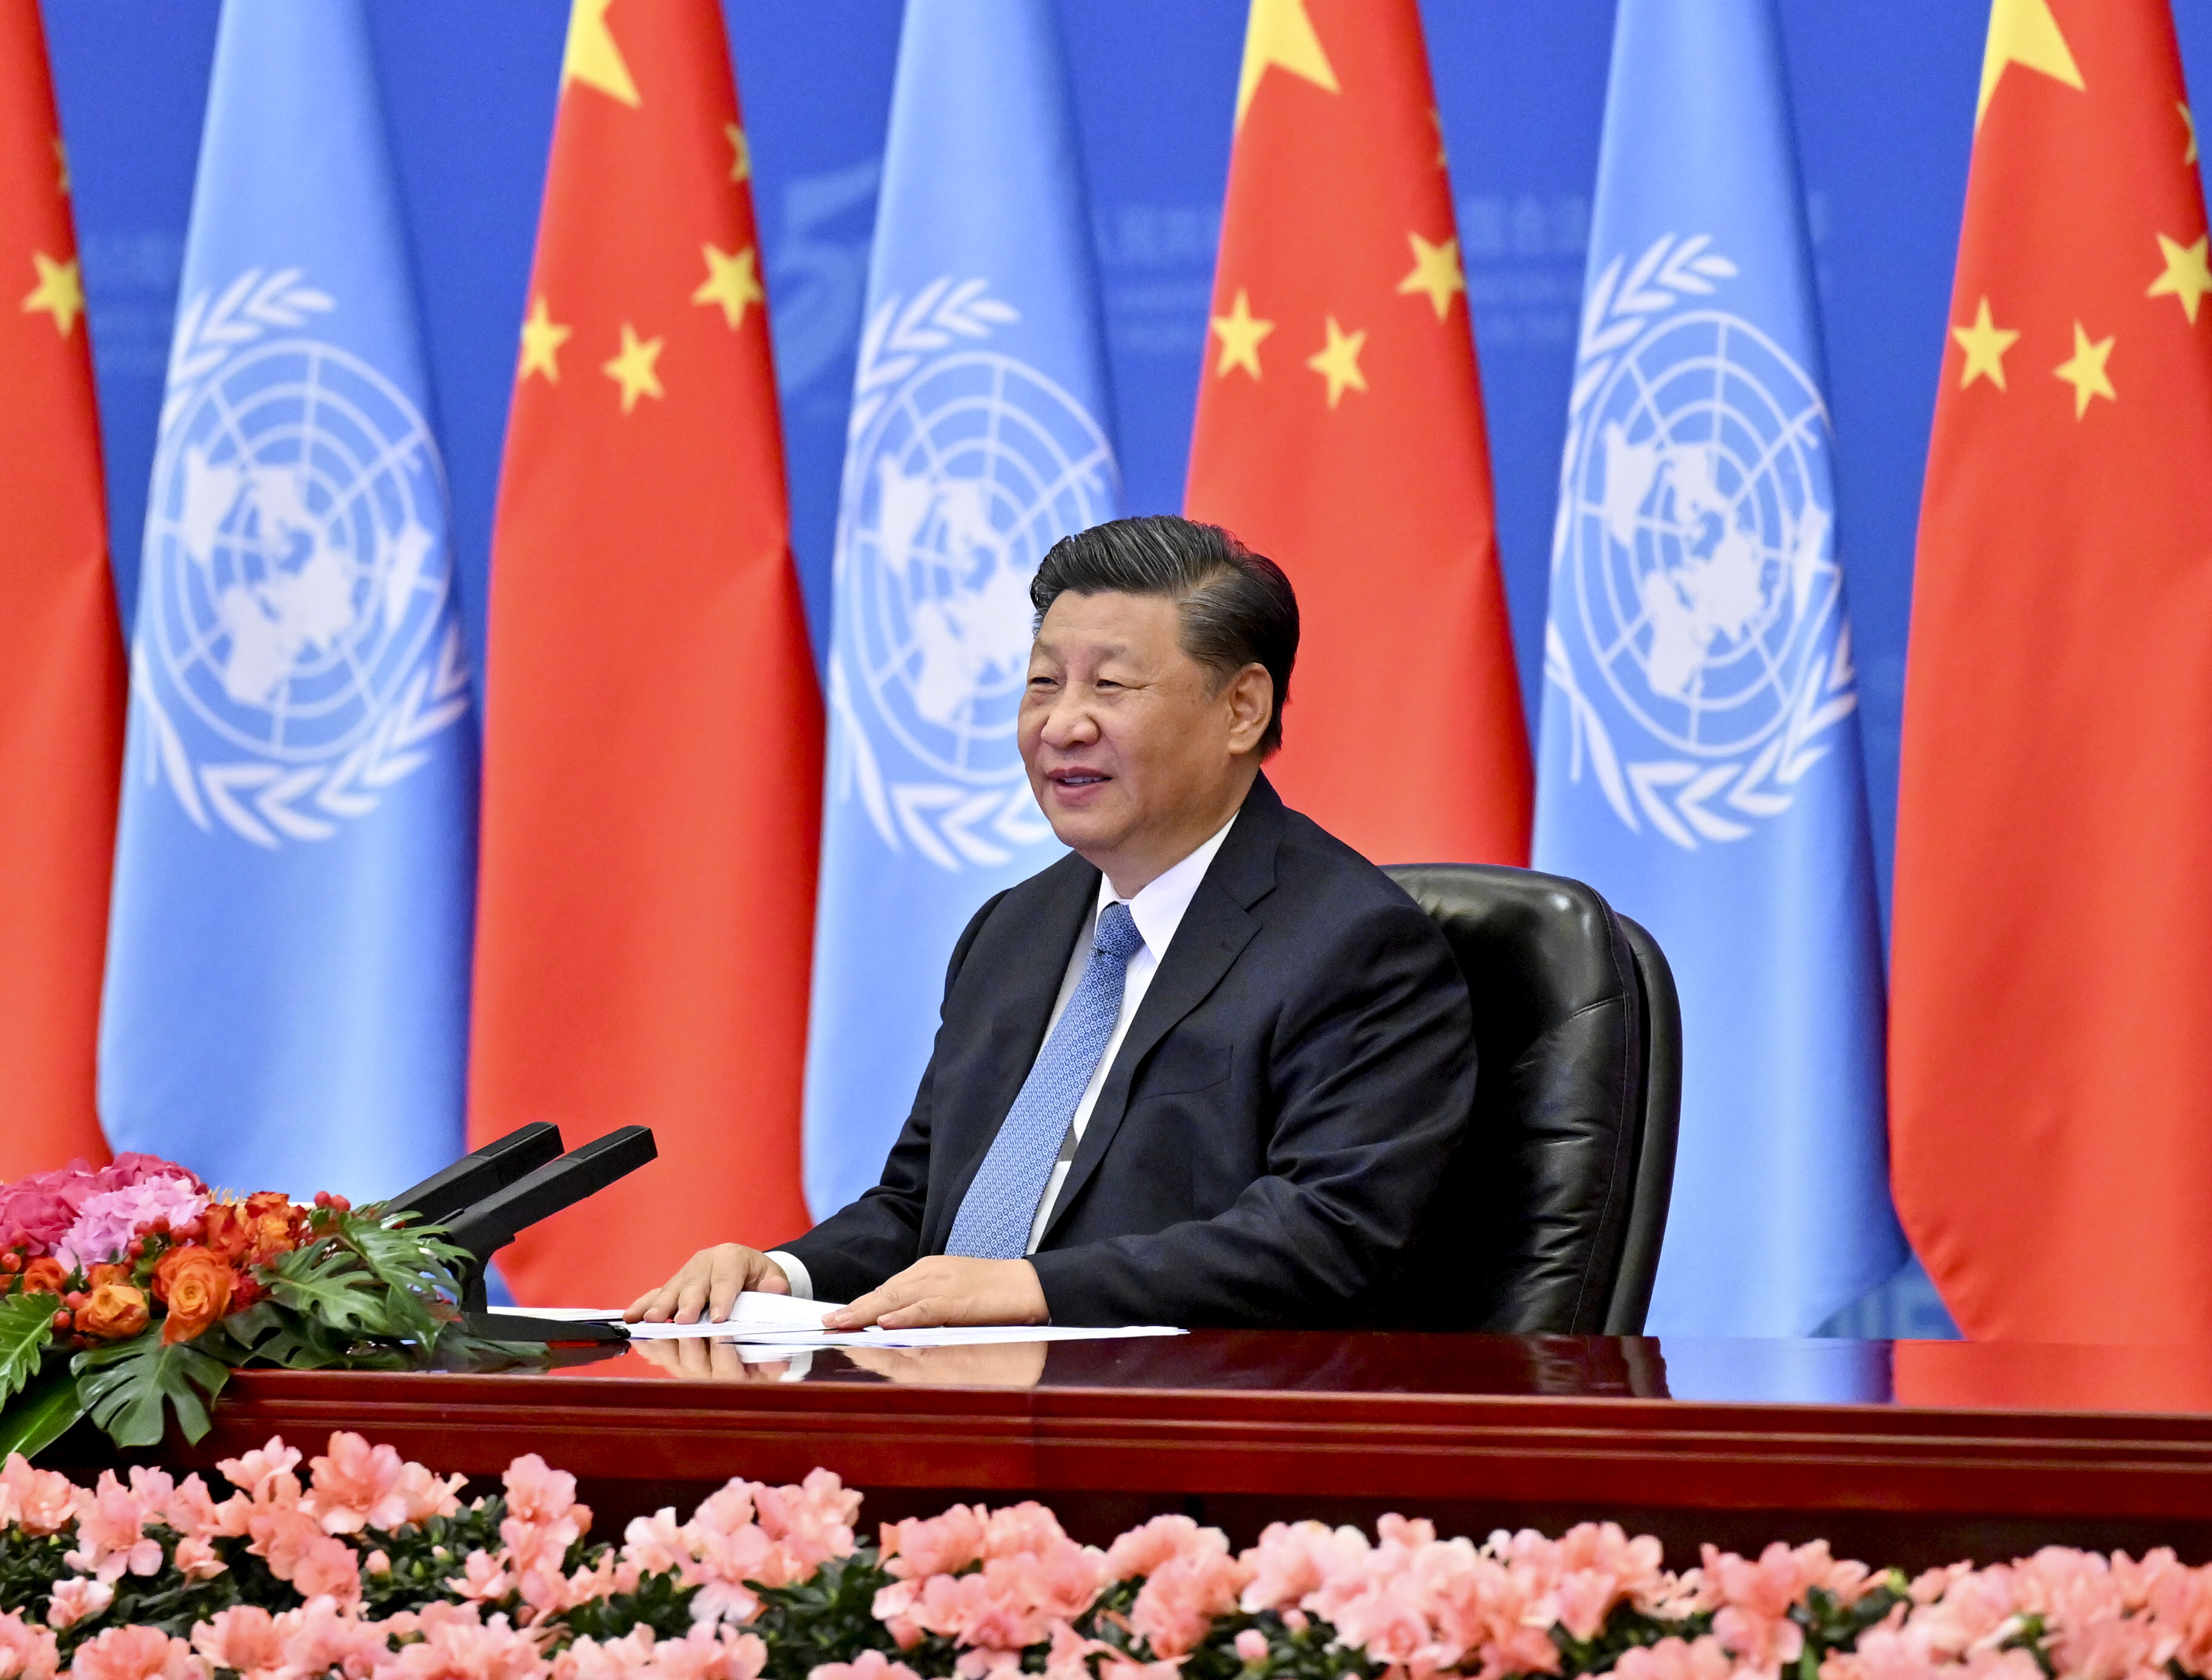 President Xi Jinping delivers a speech at a commemorative meeting in Beijing on October 25, marking the 50th anniversary of the restoration of the People’s Republic of China’s lawful seat in the United Nations. Photo: Xinhua